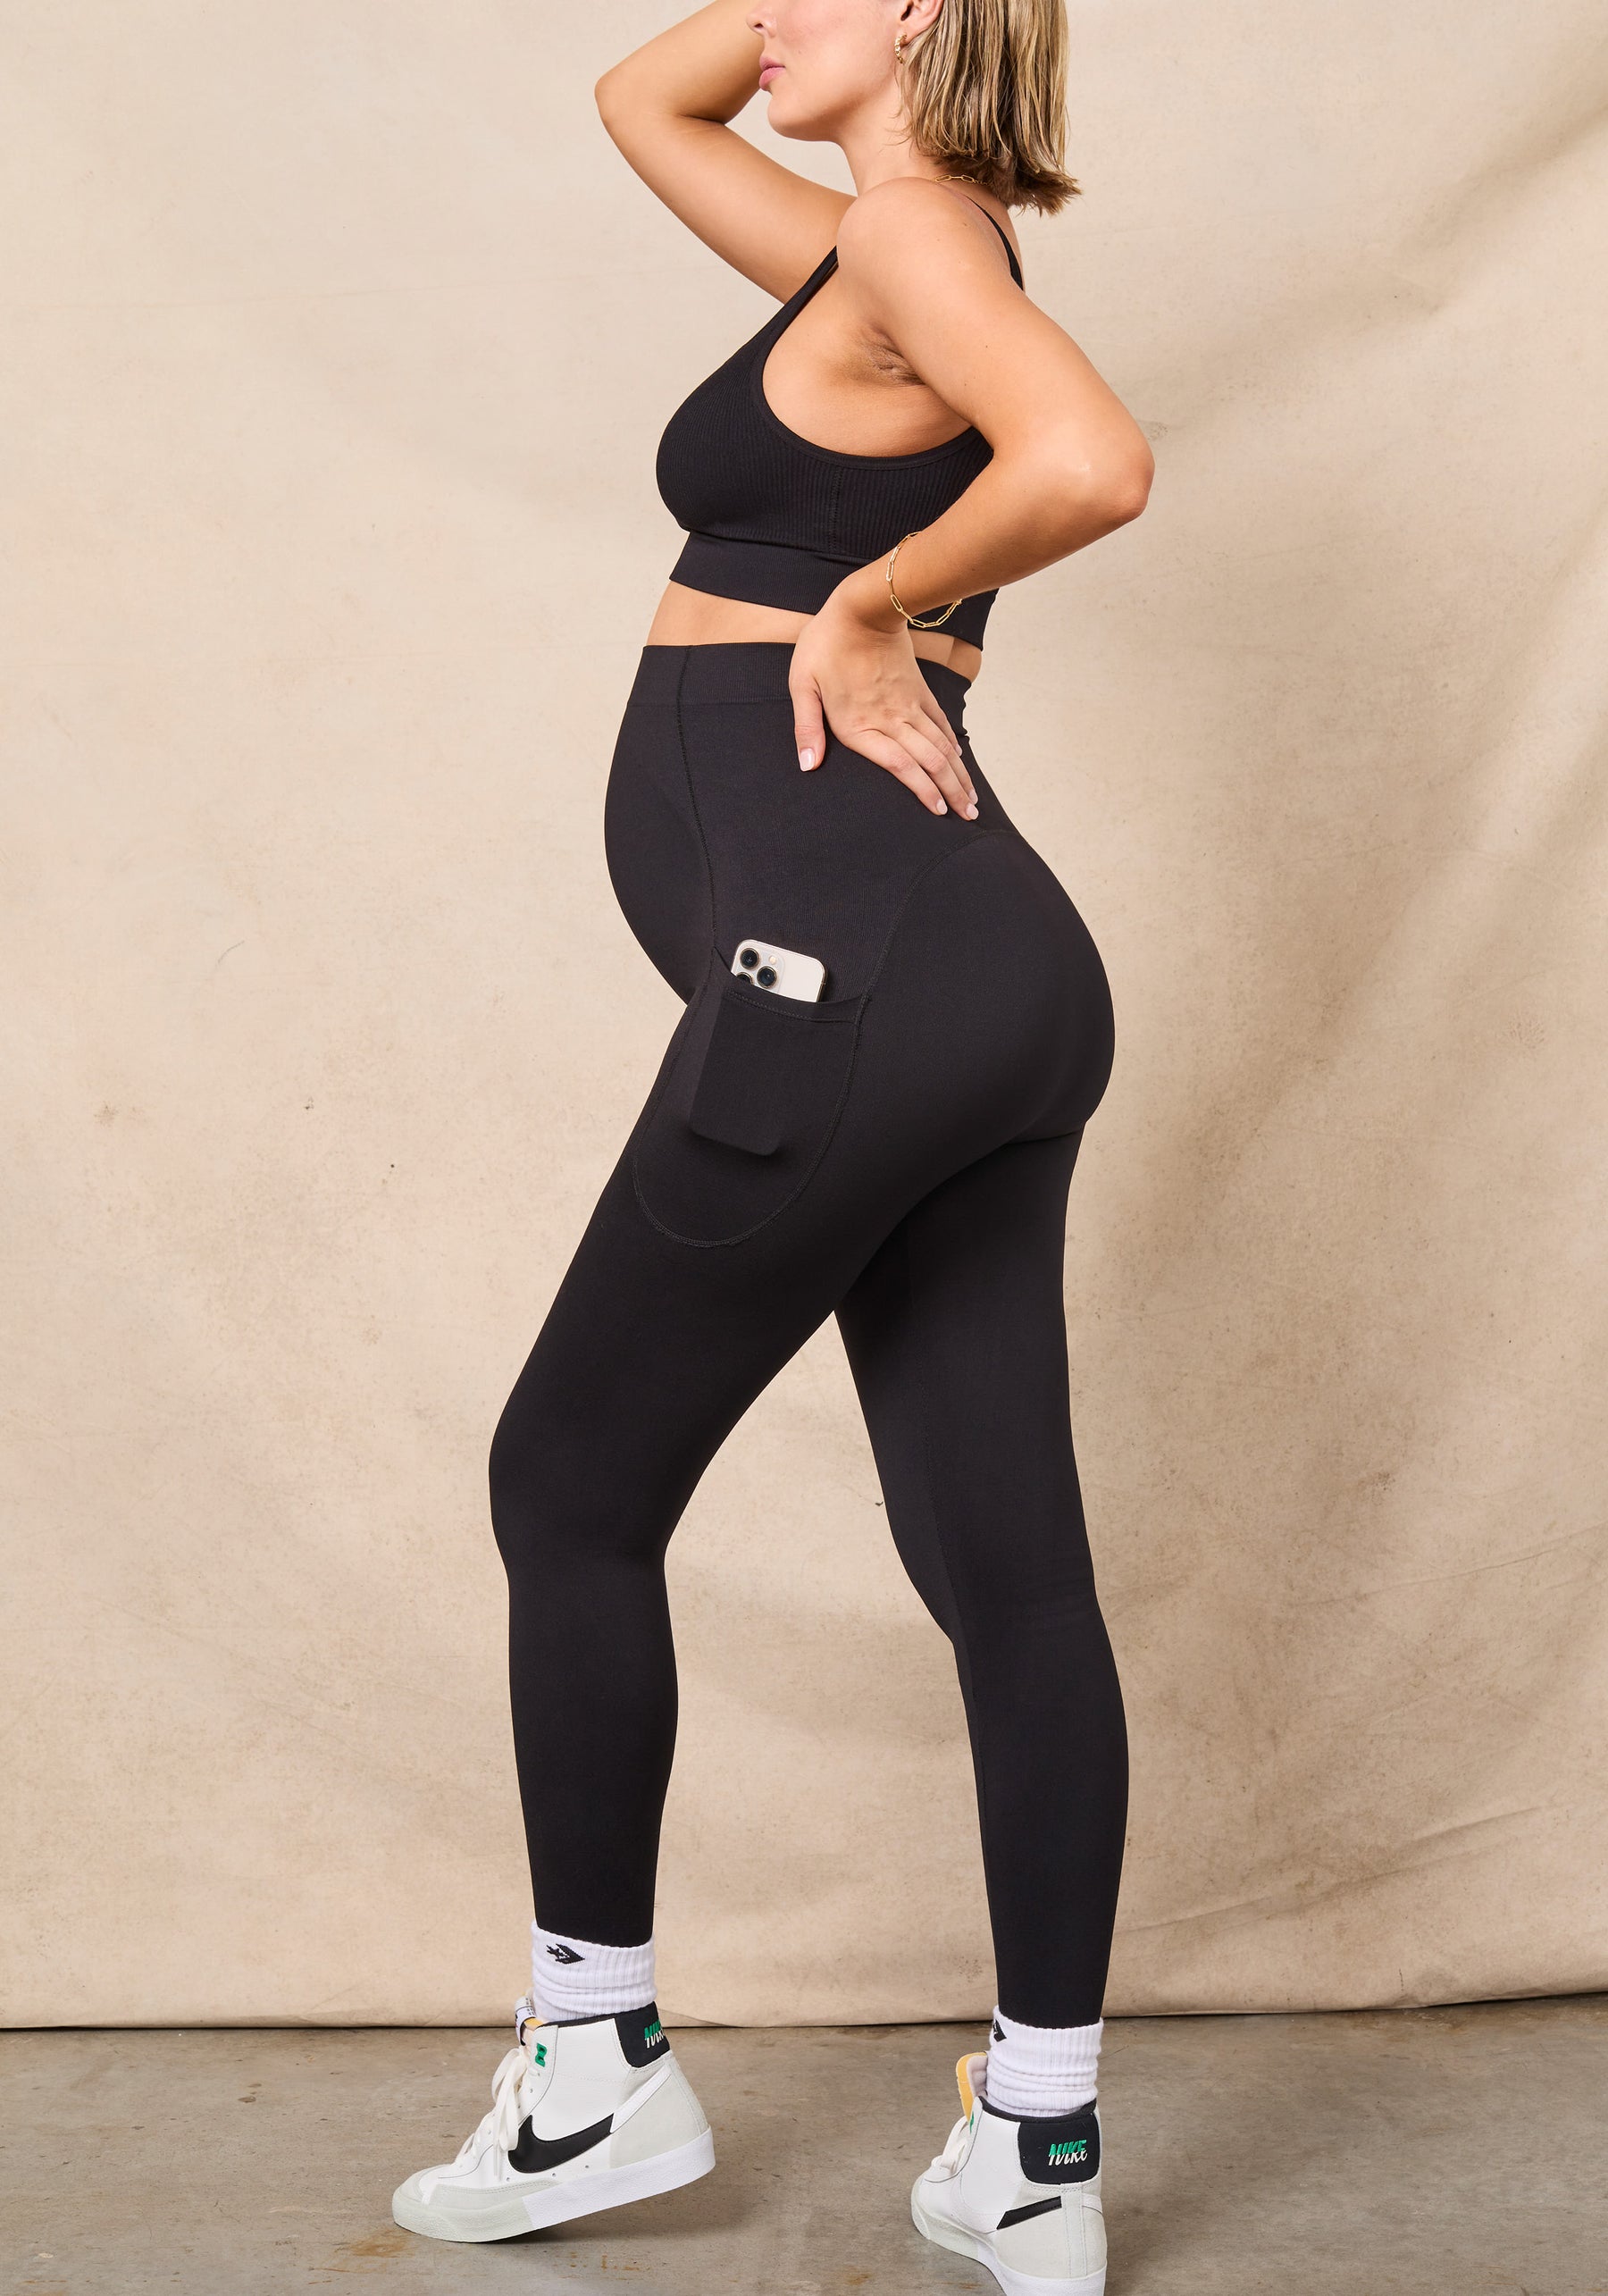 Blanqi Everyday Women's Black Stretch Maternity Belly Support Leggings  Pants XL